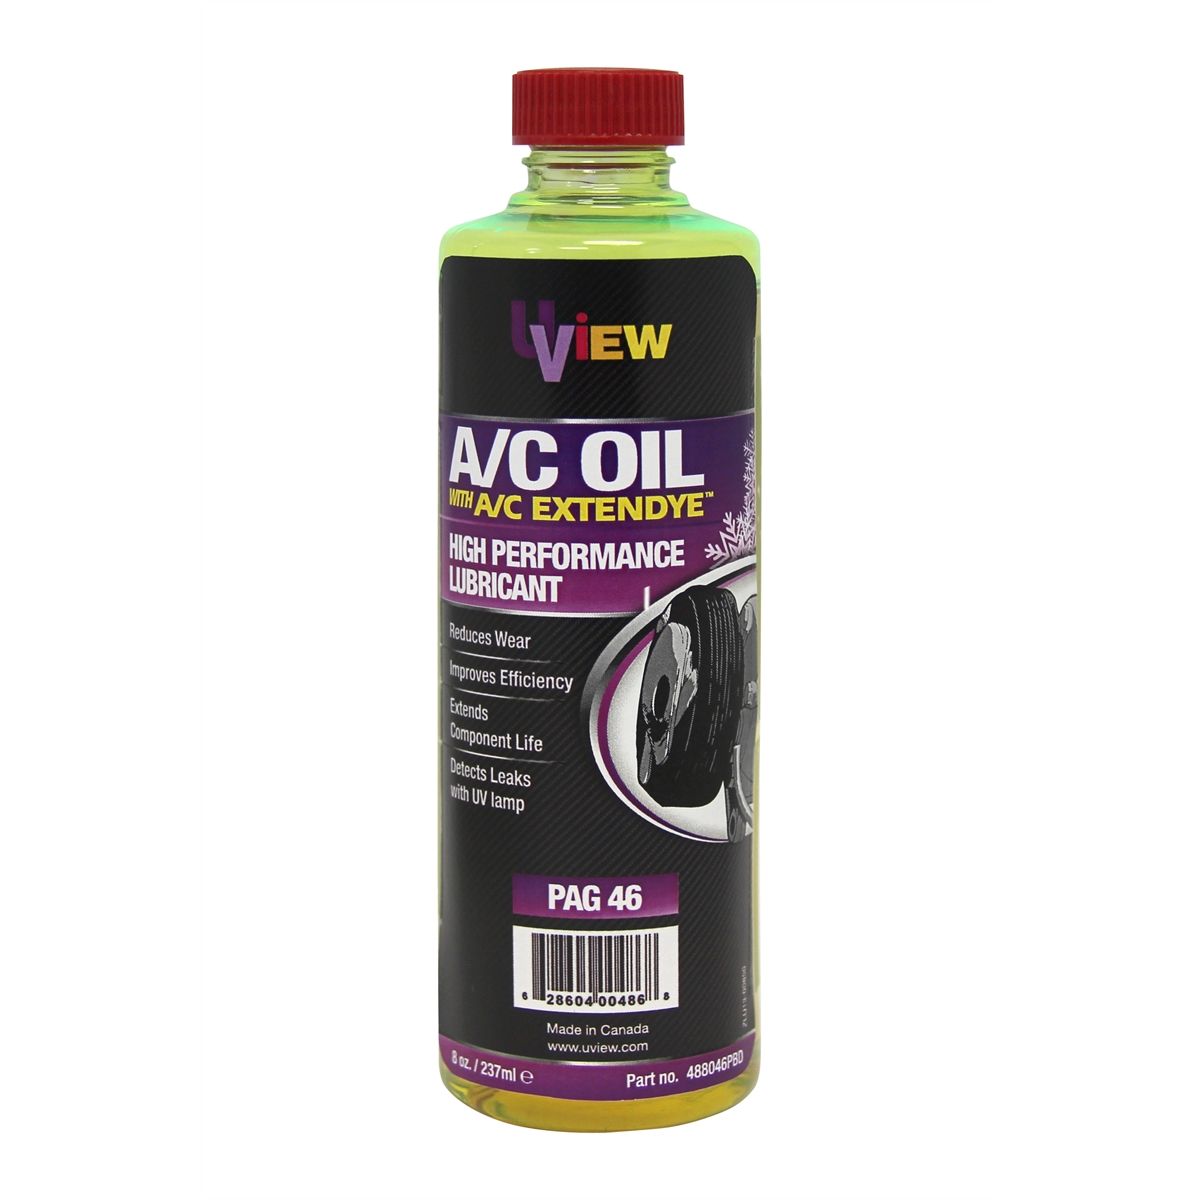 PAG 46 Oil with A/C ExtenDye